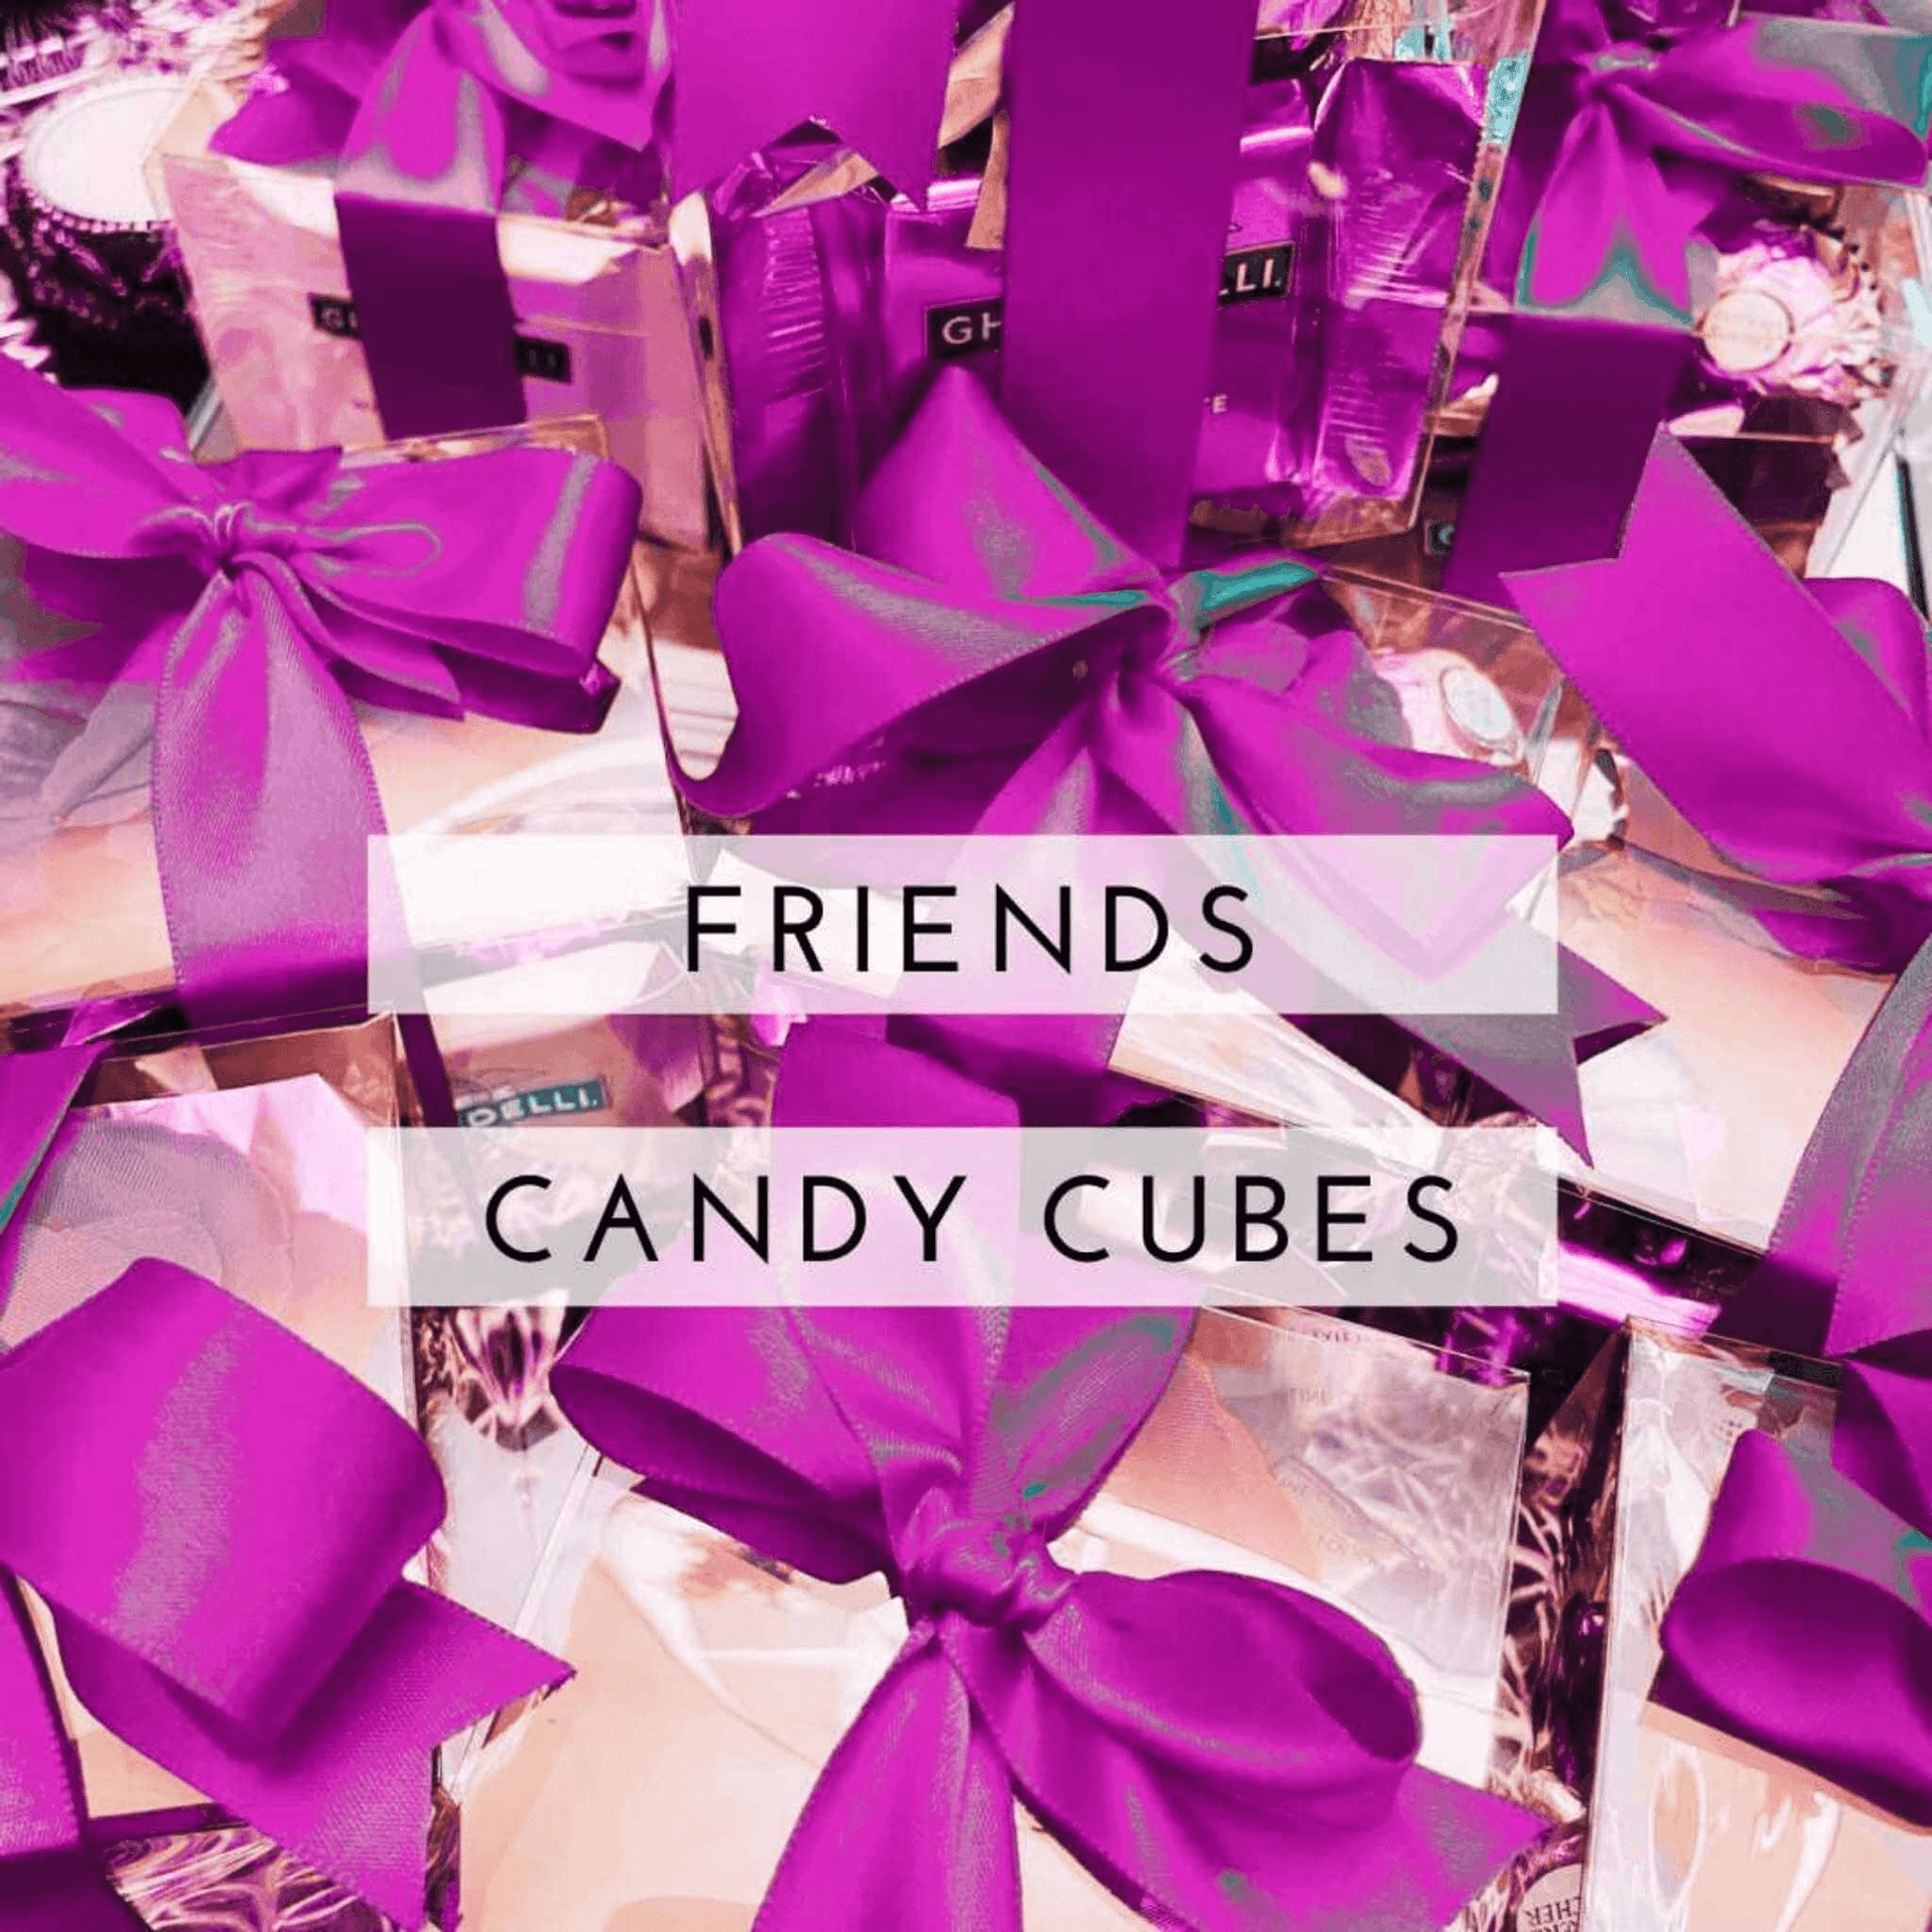 Vibrant purple candy cubes nestled in festive gift boxes, perfect for sharing with friends.